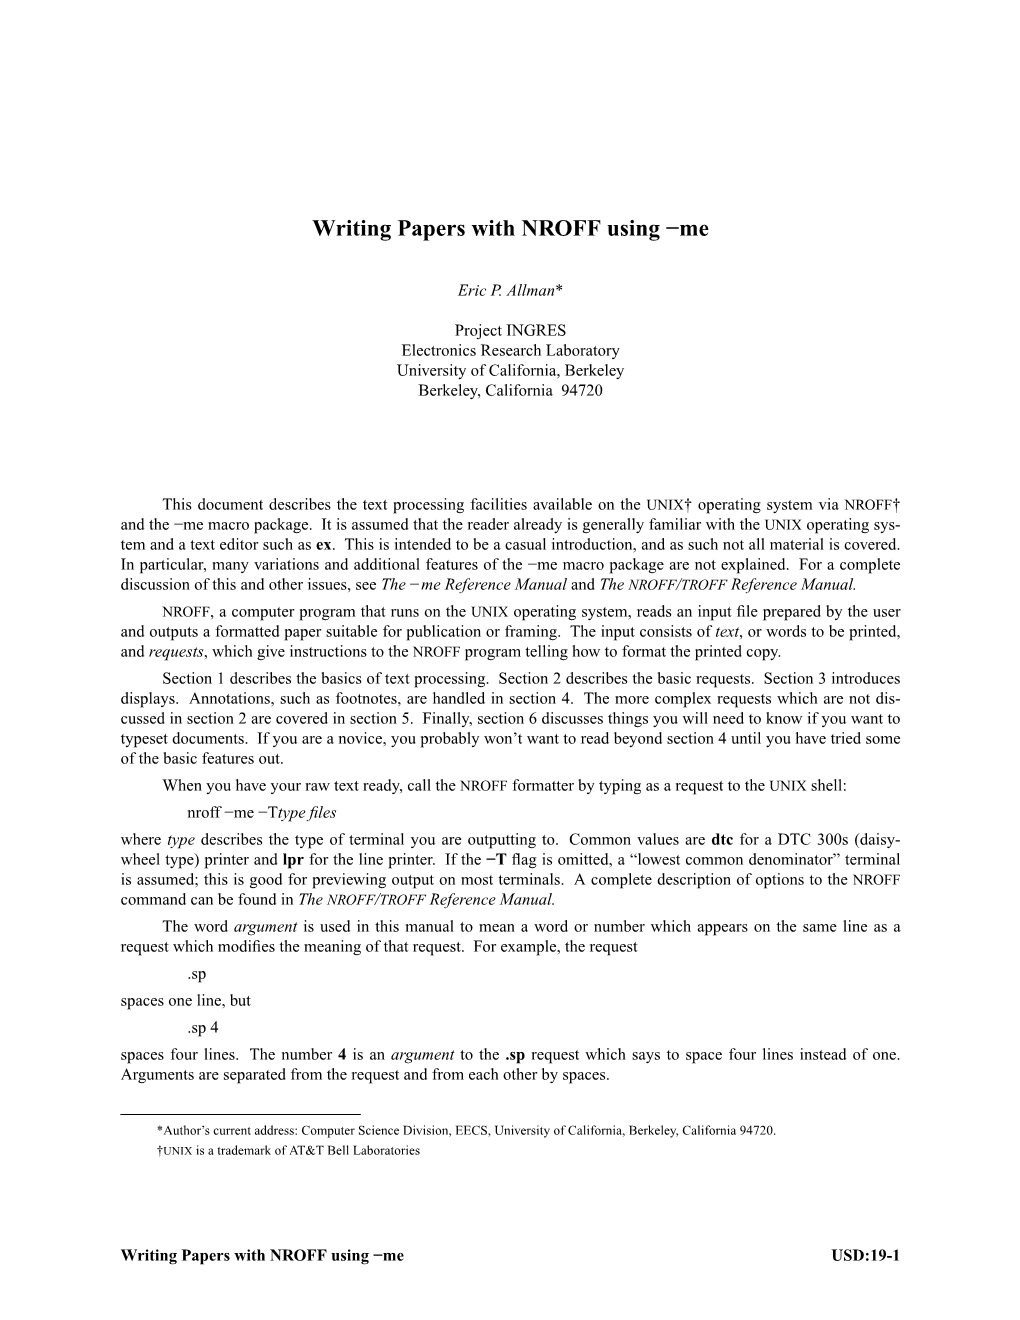 Writing Papers with NROFF Using −Me